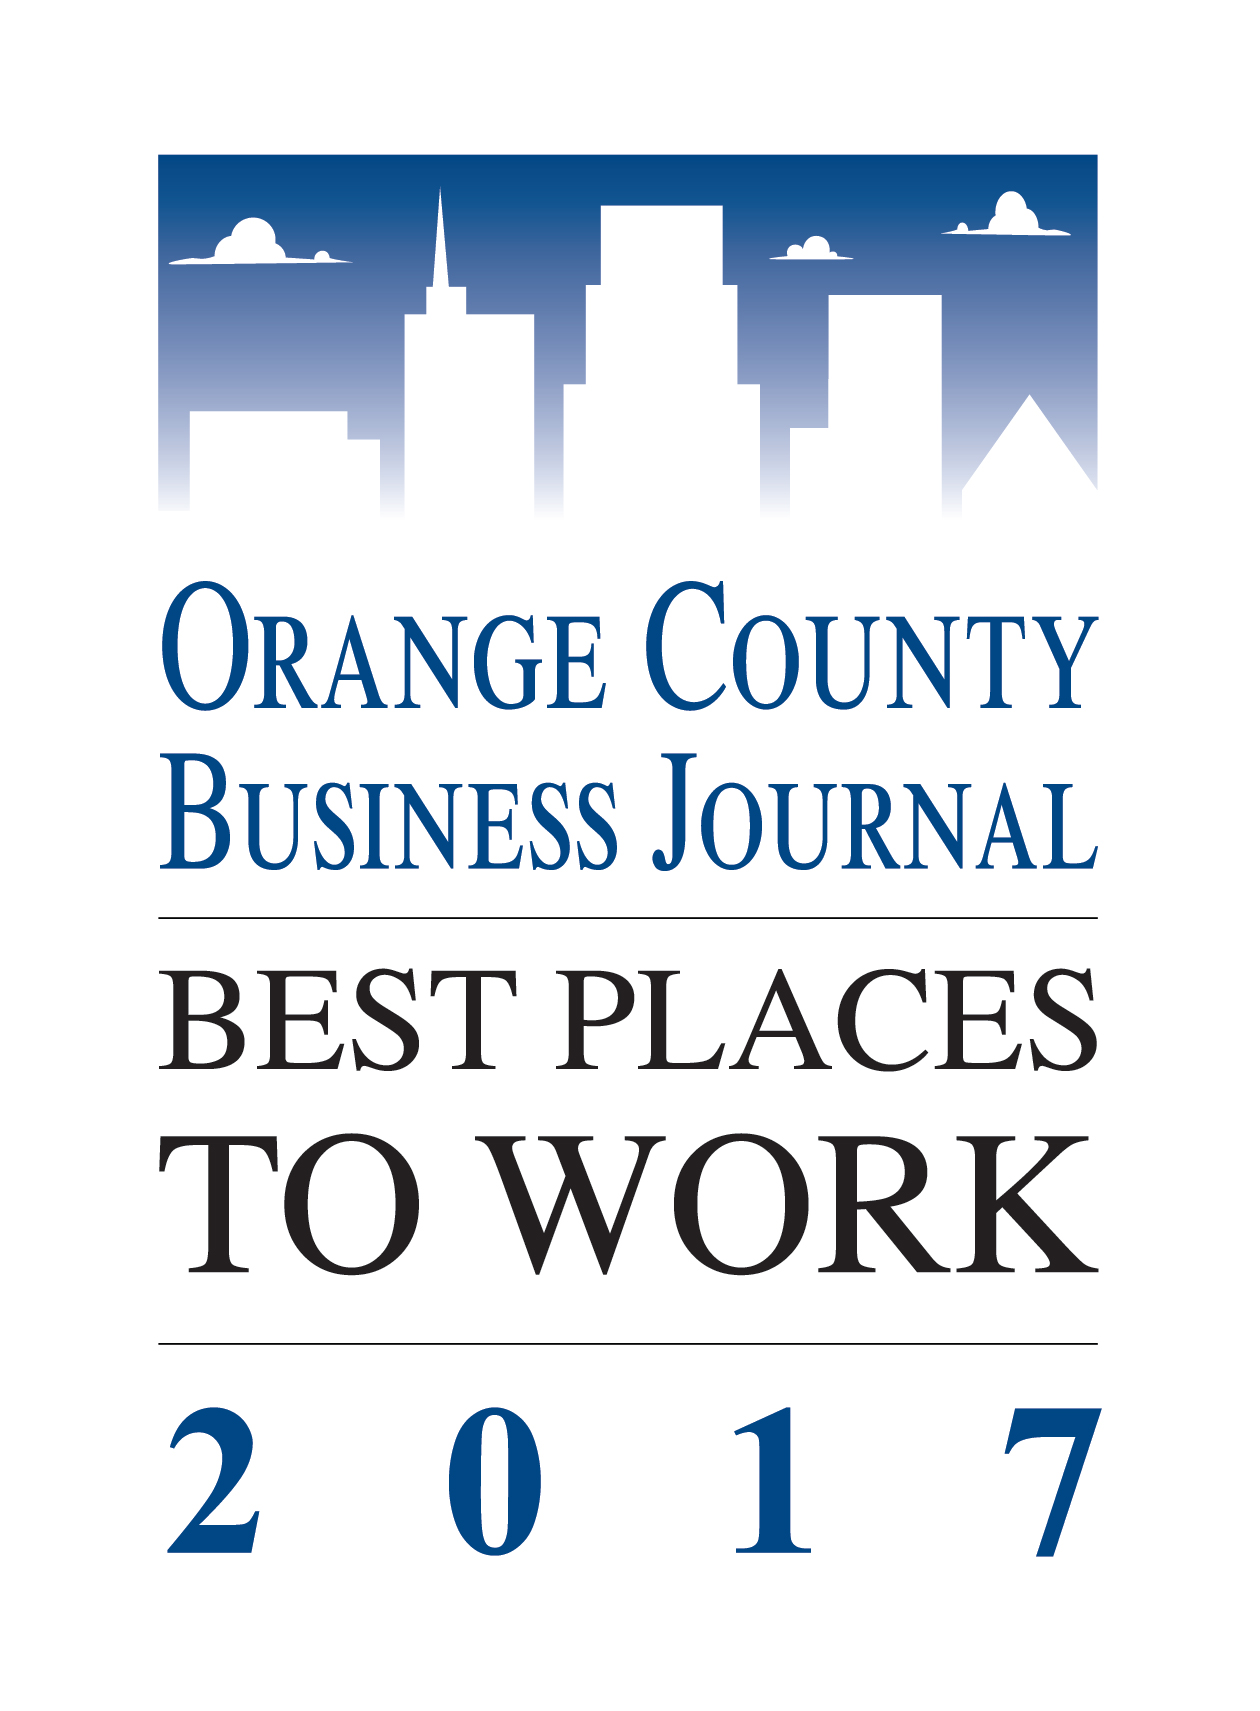 best place to work award logo 2017